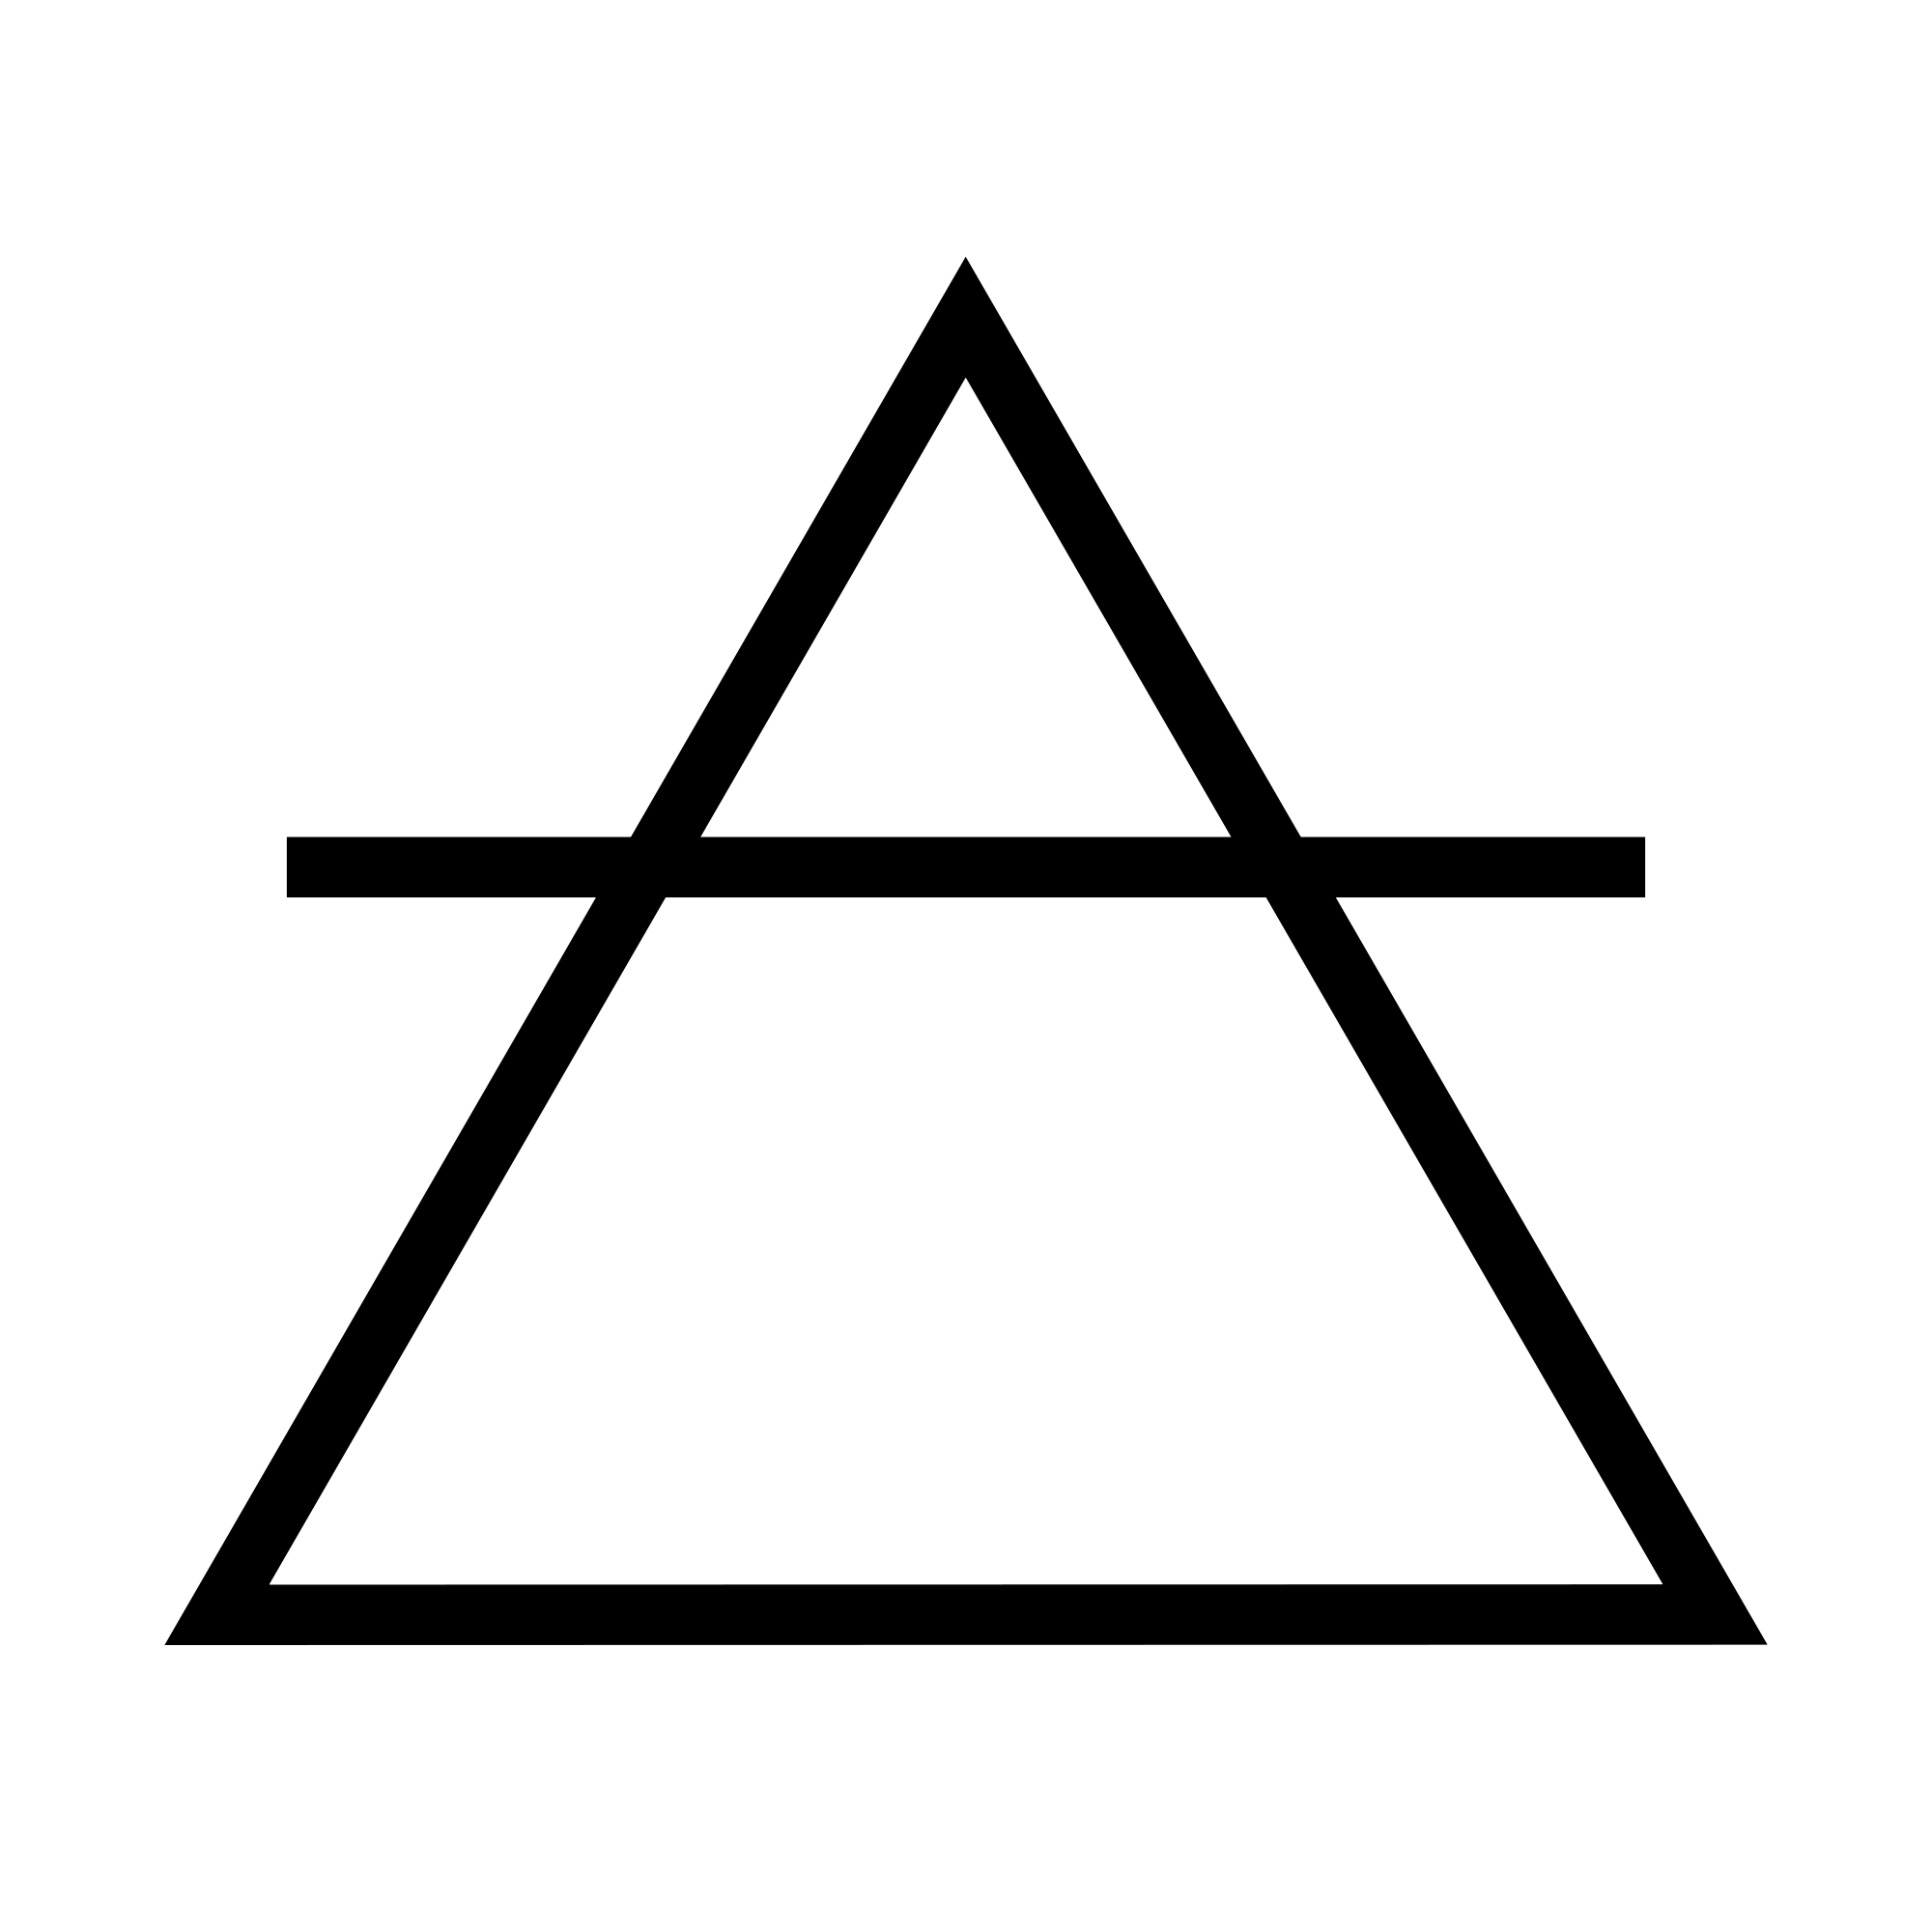 Empty Triangle Logo - What does a triangle tattoo mean? - Quora